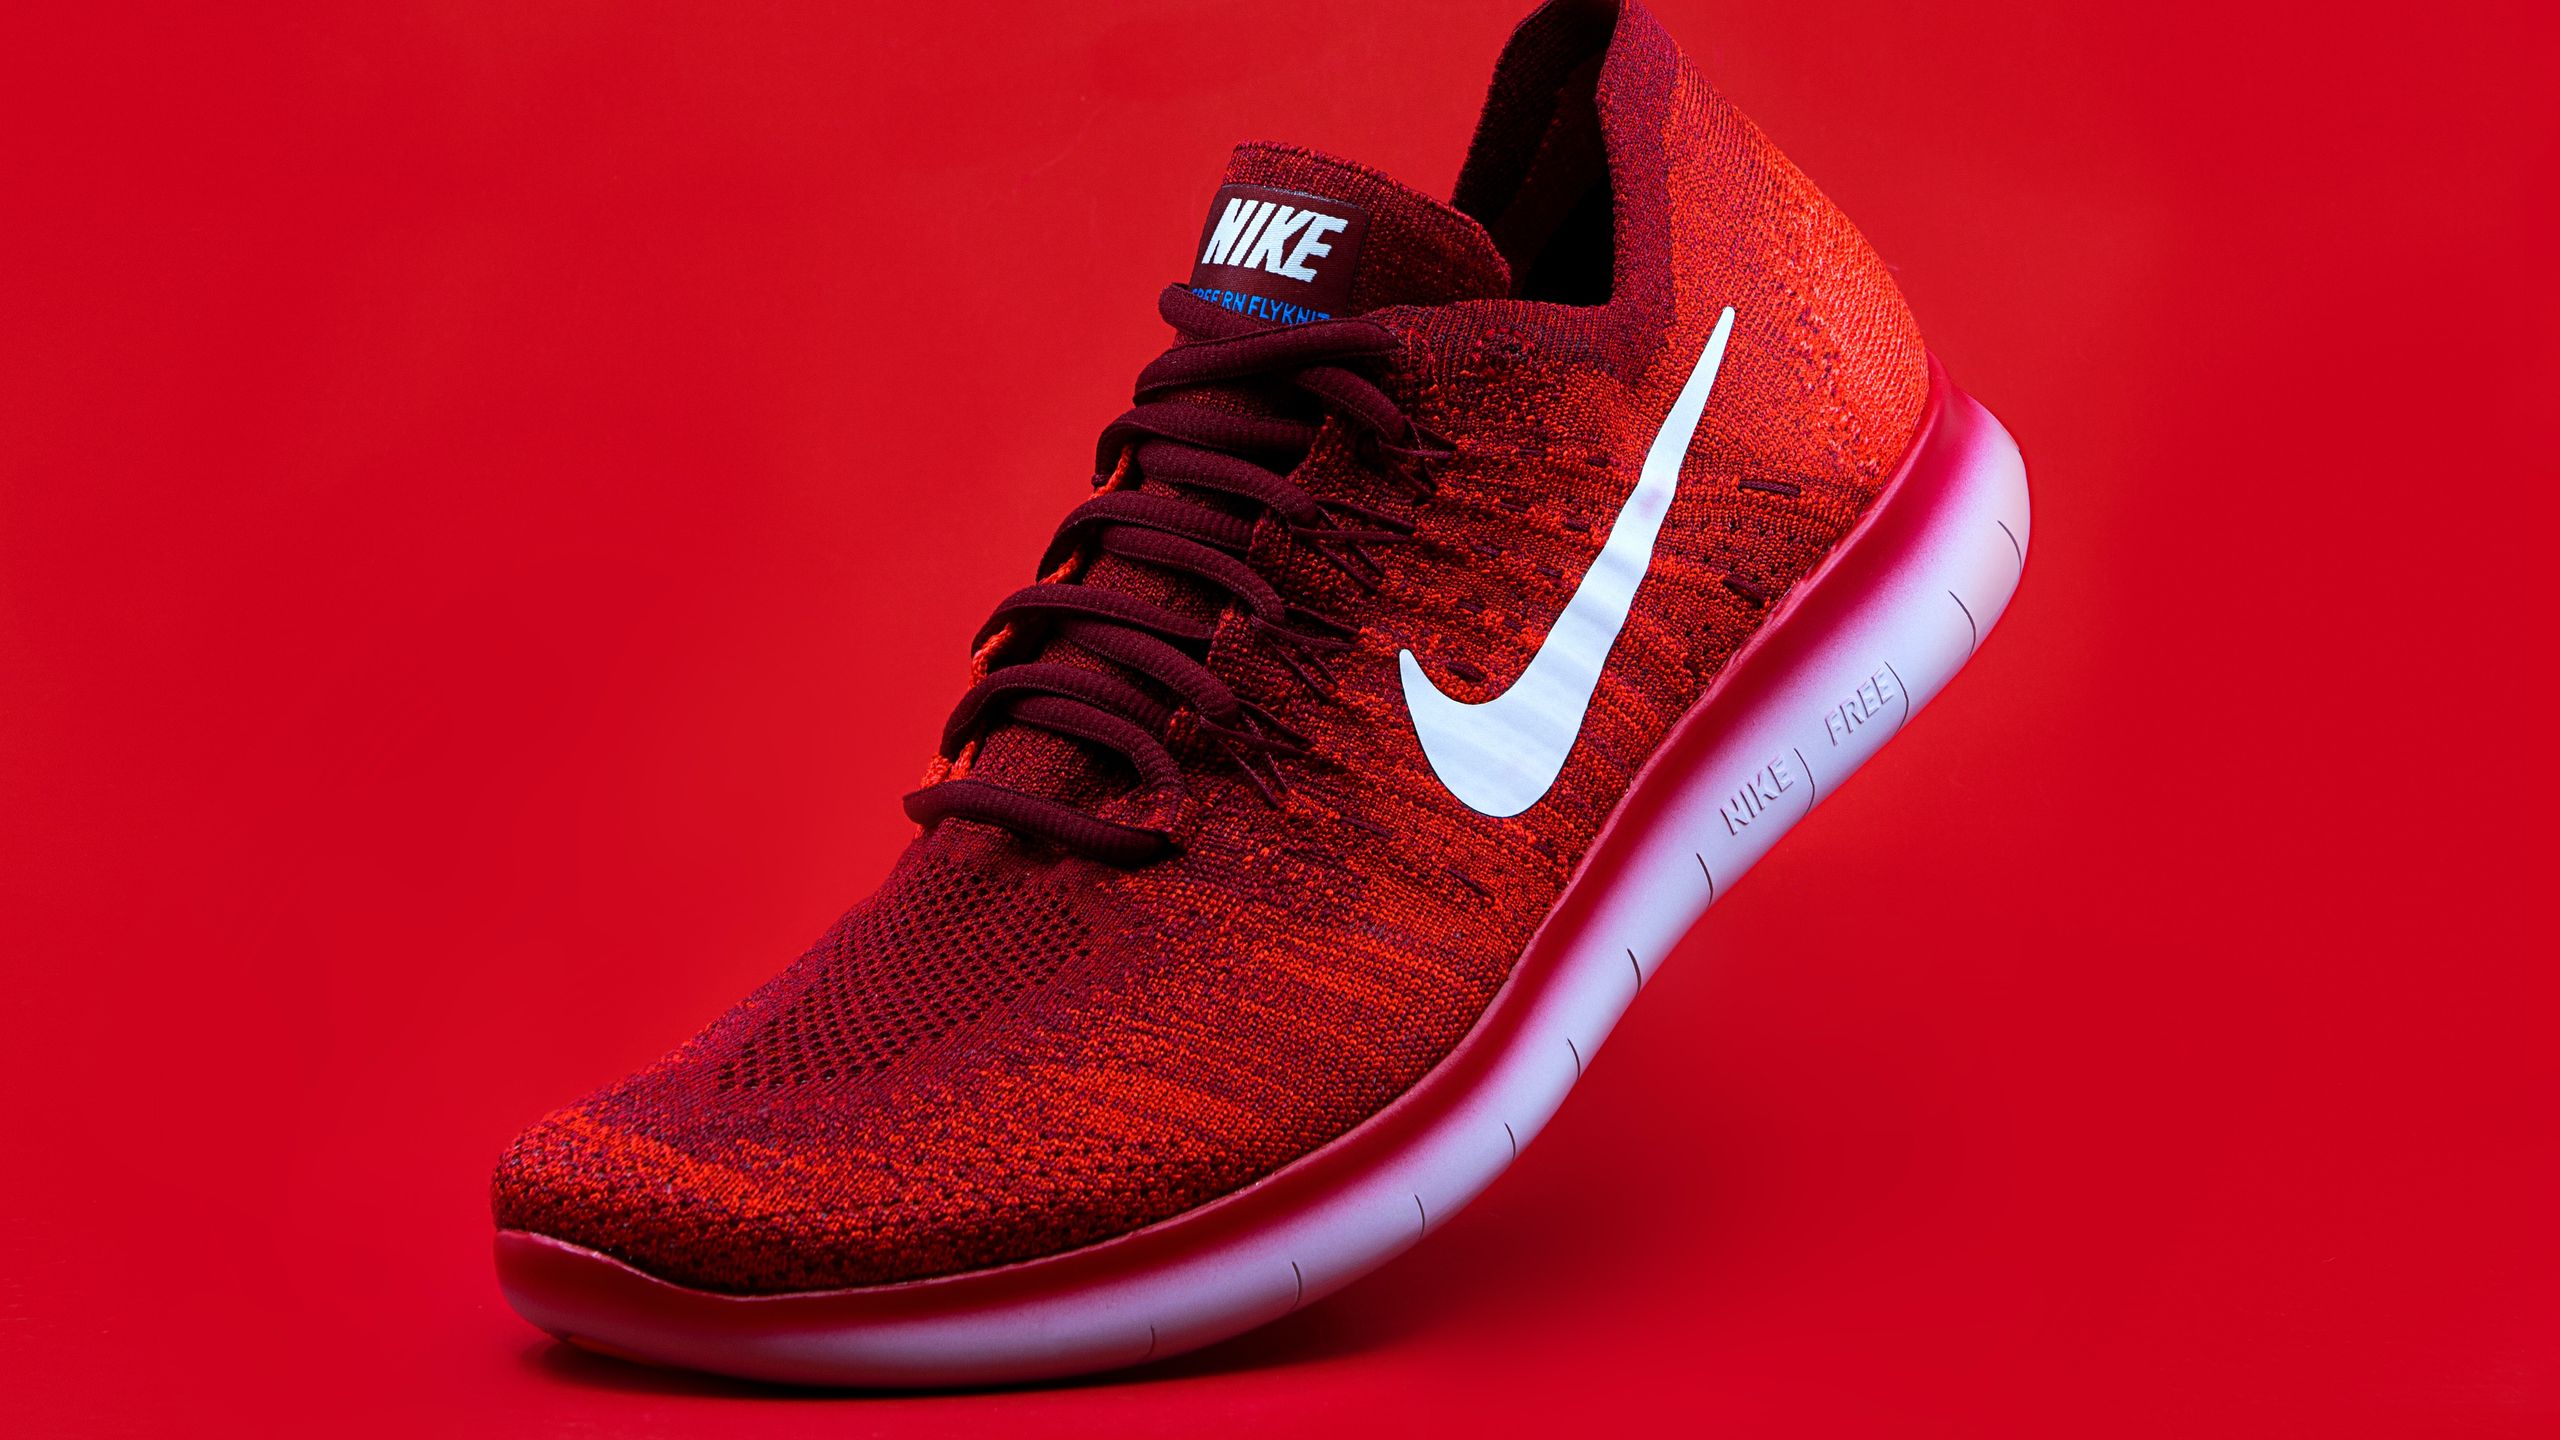 a red nike shoe is on a red background​​​​‌﻿‍﻿​‍​‍‌‍﻿﻿‌﻿​‍‌‍‍‌‌‍‌﻿‌‍‍‌‌‍﻿‍​‍​‍​﻿‍‍​‍​‍‌﻿​﻿‌‍​‌‌‍﻿‍‌‍‍‌‌﻿‌​‌﻿‍‌​‍﻿‍‌‍‍‌‌‍﻿﻿​‍​‍​‍﻿​​‍​‍‌‍‍​‌﻿​‍‌‍‌‌‌‍‌‍​‍​‍​﻿‍‍​‍​‍‌‍‍​‌﻿‌​‌﻿‌​‌﻿​​​﻿‍‍​‍﻿﻿​‍﻿﻿‌‍﻿​‌‍﻿﻿‌‍​﻿‌‍​‌‌‍﻿​‌‍‍​‌‍﻿﻿‌﻿​﻿‌﻿‌​​﻿‍‍​﻿​﻿​﻿​﻿​﻿​﻿​﻿​﻿​‍﻿﻿‌‍‍‌‌‍﻿‍‌﻿‌​‌‍‌‌‌‍﻿‍‌﻿‌​​‍﻿﻿‌‍‌‌‌‍‌​‌‍‍‌‌﻿‌​​‍﻿﻿‌‍﻿‌‌‍﻿﻿‌‍‌​‌‍‌‌​﻿﻿‌‌﻿​​‌﻿​‍‌‍‌‌‌﻿​﻿‌‍‌‌‌‍﻿‍‌﻿‌​‌‍​‌‌﻿‌​‌‍‍‌‌‍﻿﻿‌‍﻿‍​﻿‍﻿‌‍‍‌‌‍‌​​﻿﻿‌​﻿‌﻿​﻿‌﻿‌‍‌‍​﻿​‍‌‍​‌​﻿‍​‌‍​﻿​﻿‍​​‍﻿‌‌‍‌‍​﻿​﻿‌‍‌‍​﻿​​​‍﻿‌​﻿‌​​﻿‍​​﻿​​​﻿‌﻿​‍﻿‌​﻿‍‌​﻿​﻿‌‍​‍​﻿​‍​‍﻿‌​﻿‌‍​﻿​‌‌‍‌‍​﻿​‌‌‍‌‍​﻿‌‍​﻿‌​​﻿‍​‌‍​﻿​﻿‌﻿​﻿​‌​﻿​‌​﻿‍﻿‌﻿‌​‌﻿‍‌‌﻿​​‌‍‌‌​﻿﻿‌‌﻿​﻿‌‍‍​‌‍﻿﻿‌‍‌‌​﻿‍﻿‌﻿​​‌‍​‌‌﻿‌​‌‍‍​​﻿﻿‌‌‍﻿‌‌‍‌‌‌‍‌​‌‍‍‌‌‍​‌​‍‌‌​﻿‌‌‌​​‍‌‌﻿﻿‌‍‍﻿‌‍‌‌‌﻿‍‌​‍‌‌​﻿​﻿‌​‌​​‍‌‌​﻿​﻿‌​‌​​‍‌‌​﻿​‍​﻿​‍‌‍​﻿‌‍‌‌‌‍‌​‌‍​﻿​﻿‌​​﻿‍​​﻿‌﻿​﻿‍​​﻿​​‌‍​‍​﻿​‍‌‍​‌​‍‌‌​﻿​‍​﻿​‍​‍‌‌​﻿‌‌‌​‌​​‍﻿‍‌‍​‌‌‍﻿​‌﻿‌​​﻿﻿﻿‌‍​‍‌‍​‌‌﻿​﻿‌‍‌‌‌‌‌‌‌﻿​‍‌‍﻿​​﻿﻿‌‌‍‍​‌﻿‌​‌﻿‌​‌﻿​​​‍‌‌​﻿​﻿‌​​‌​‍‌‌​﻿​‍‌​‌‍​‍‌‌​﻿​‍‌​‌‍‌‍﻿​‌‍﻿﻿‌‍​﻿‌‍​‌‌‍﻿​‌‍‍​‌‍﻿﻿‌﻿​﻿‌﻿‌​​‍‌‌​﻿​﻿‌​​‌​﻿​﻿​﻿​﻿​﻿​﻿​﻿​﻿​‍‌‍‌‍‍‌‌‍‌​​﻿﻿‌​﻿‌﻿​﻿‌﻿‌‍‌‍​﻿​‍‌‍​‌​﻿‍​‌‍​﻿​﻿‍​​‍﻿‌‌‍‌‍​﻿​﻿‌‍‌‍​﻿​​​‍﻿‌​﻿‌​​﻿‍​​﻿​​​﻿‌﻿​‍﻿‌​﻿‍‌​﻿​﻿‌‍​‍​﻿​‍​‍﻿‌​﻿‌‍​﻿​‌‌‍‌‍​﻿​‌‌‍‌‍​﻿‌‍​﻿‌​​﻿‍​‌‍​﻿​﻿‌﻿​﻿​‌​﻿​‌​‍‌‍‌﻿‌​‌﻿‍‌‌﻿​​‌‍‌‌​﻿﻿‌‌﻿​﻿‌‍‍​‌‍﻿﻿‌‍‌‌​‍‌‍‌﻿​​‌‍​‌‌﻿‌​‌‍‍​​﻿﻿‌‌‍﻿‌‌‍‌‌‌‍‌​‌‍‍‌‌‍​‌​‍‌‌​﻿‌‌‌​​‍‌‌﻿﻿‌‍‍﻿‌‍‌‌‌﻿‍‌​‍‌‌​﻿​﻿‌​‌​​‍‌‌​﻿​﻿‌​‌​​‍‌‌​﻿​‍​﻿​‍‌‍​﻿‌‍‌‌‌‍‌​‌‍​﻿​﻿‌​​﻿‍​​﻿‌﻿​﻿‍​​﻿​​‌‍​‍​﻿​‍‌‍​‌​‍‌‌​﻿​‍​﻿​‍​‍‌‌​﻿‌‌‌​‌​​‍﻿‍‌‍​‌‌‍﻿​‌﻿‌​​‍​‍‌﻿﻿‌